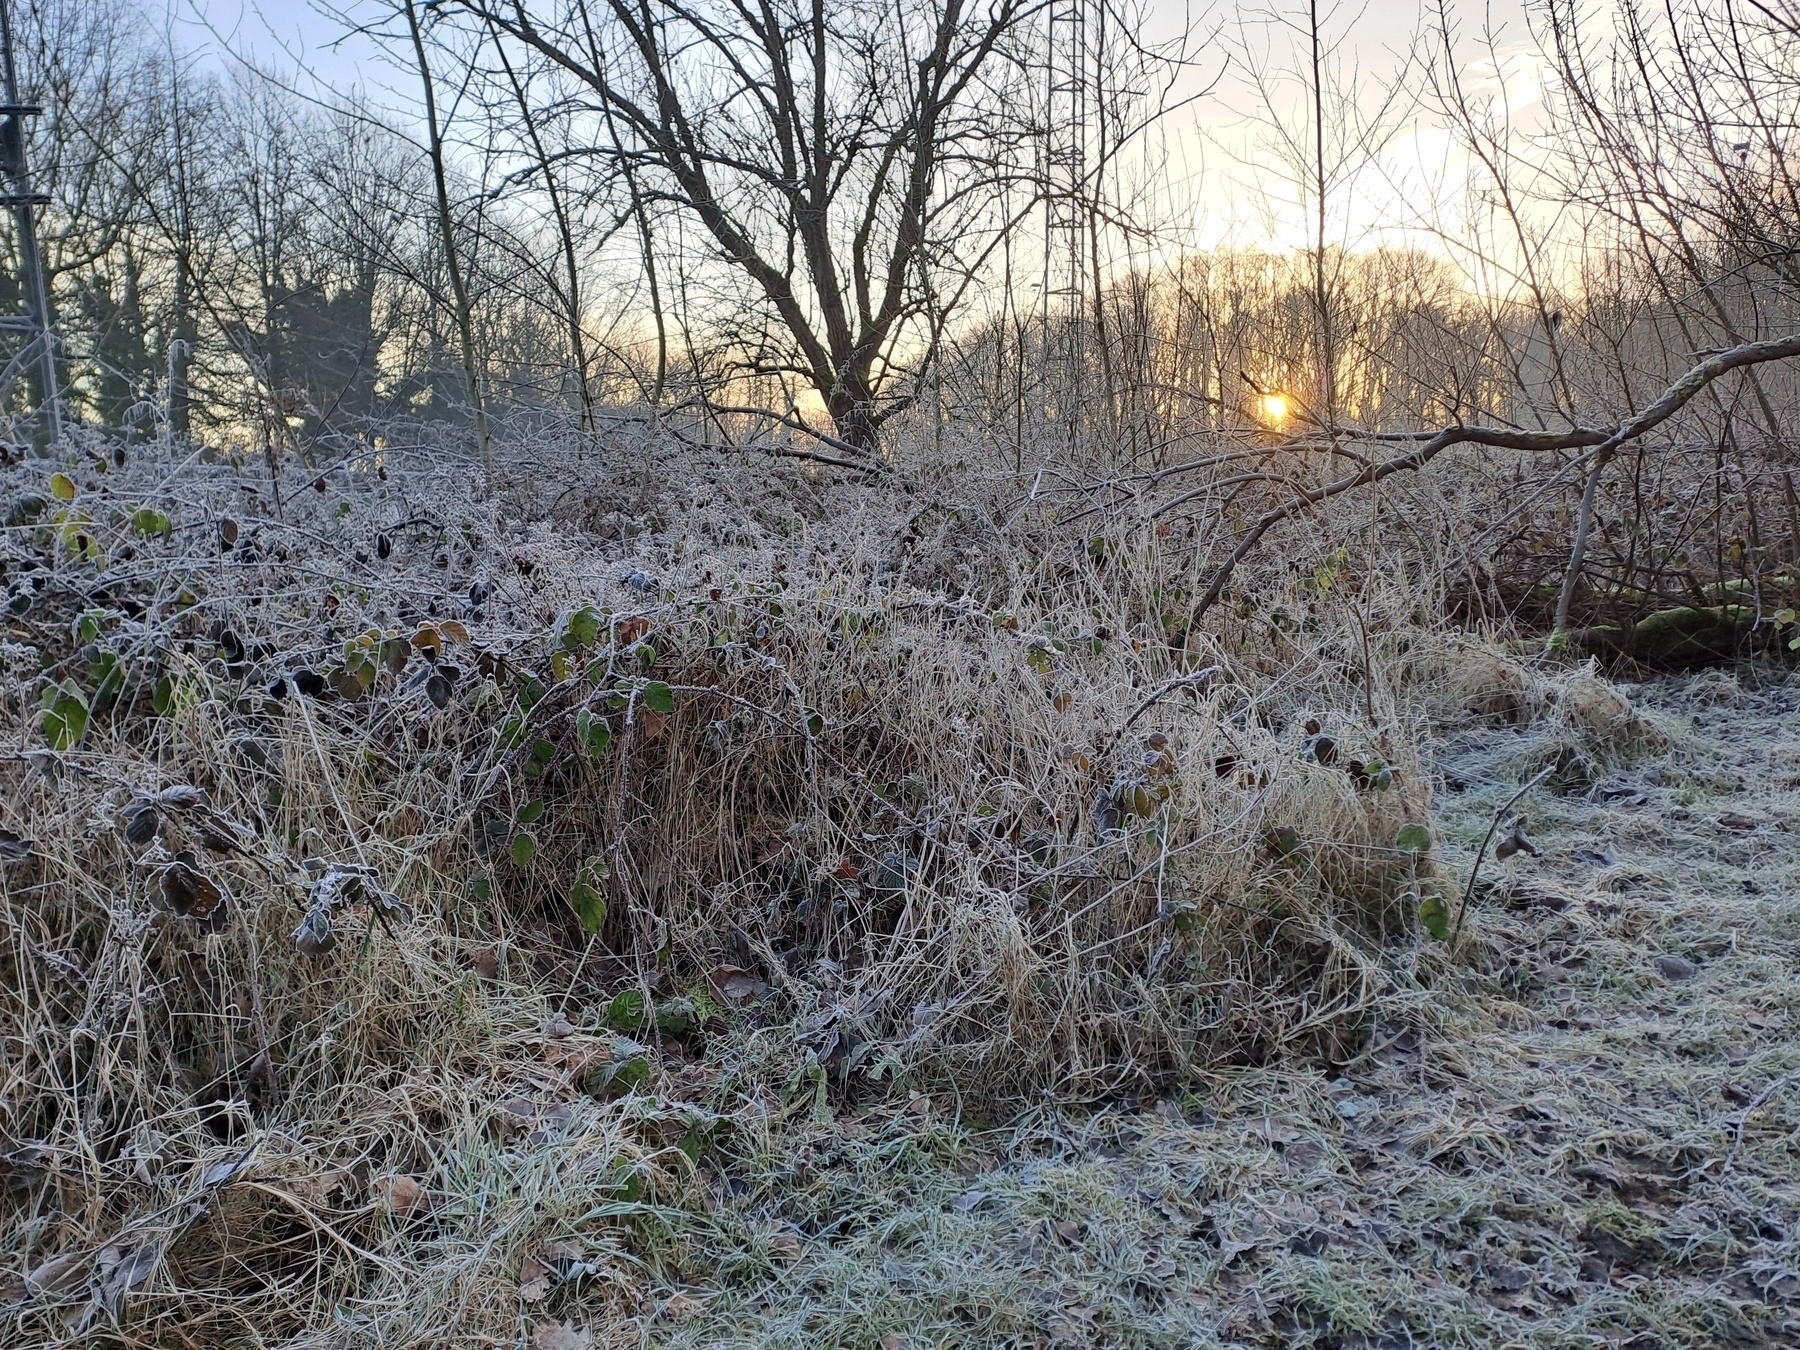 Plants with frost on them, with an upcomming sun between trees in the distance...